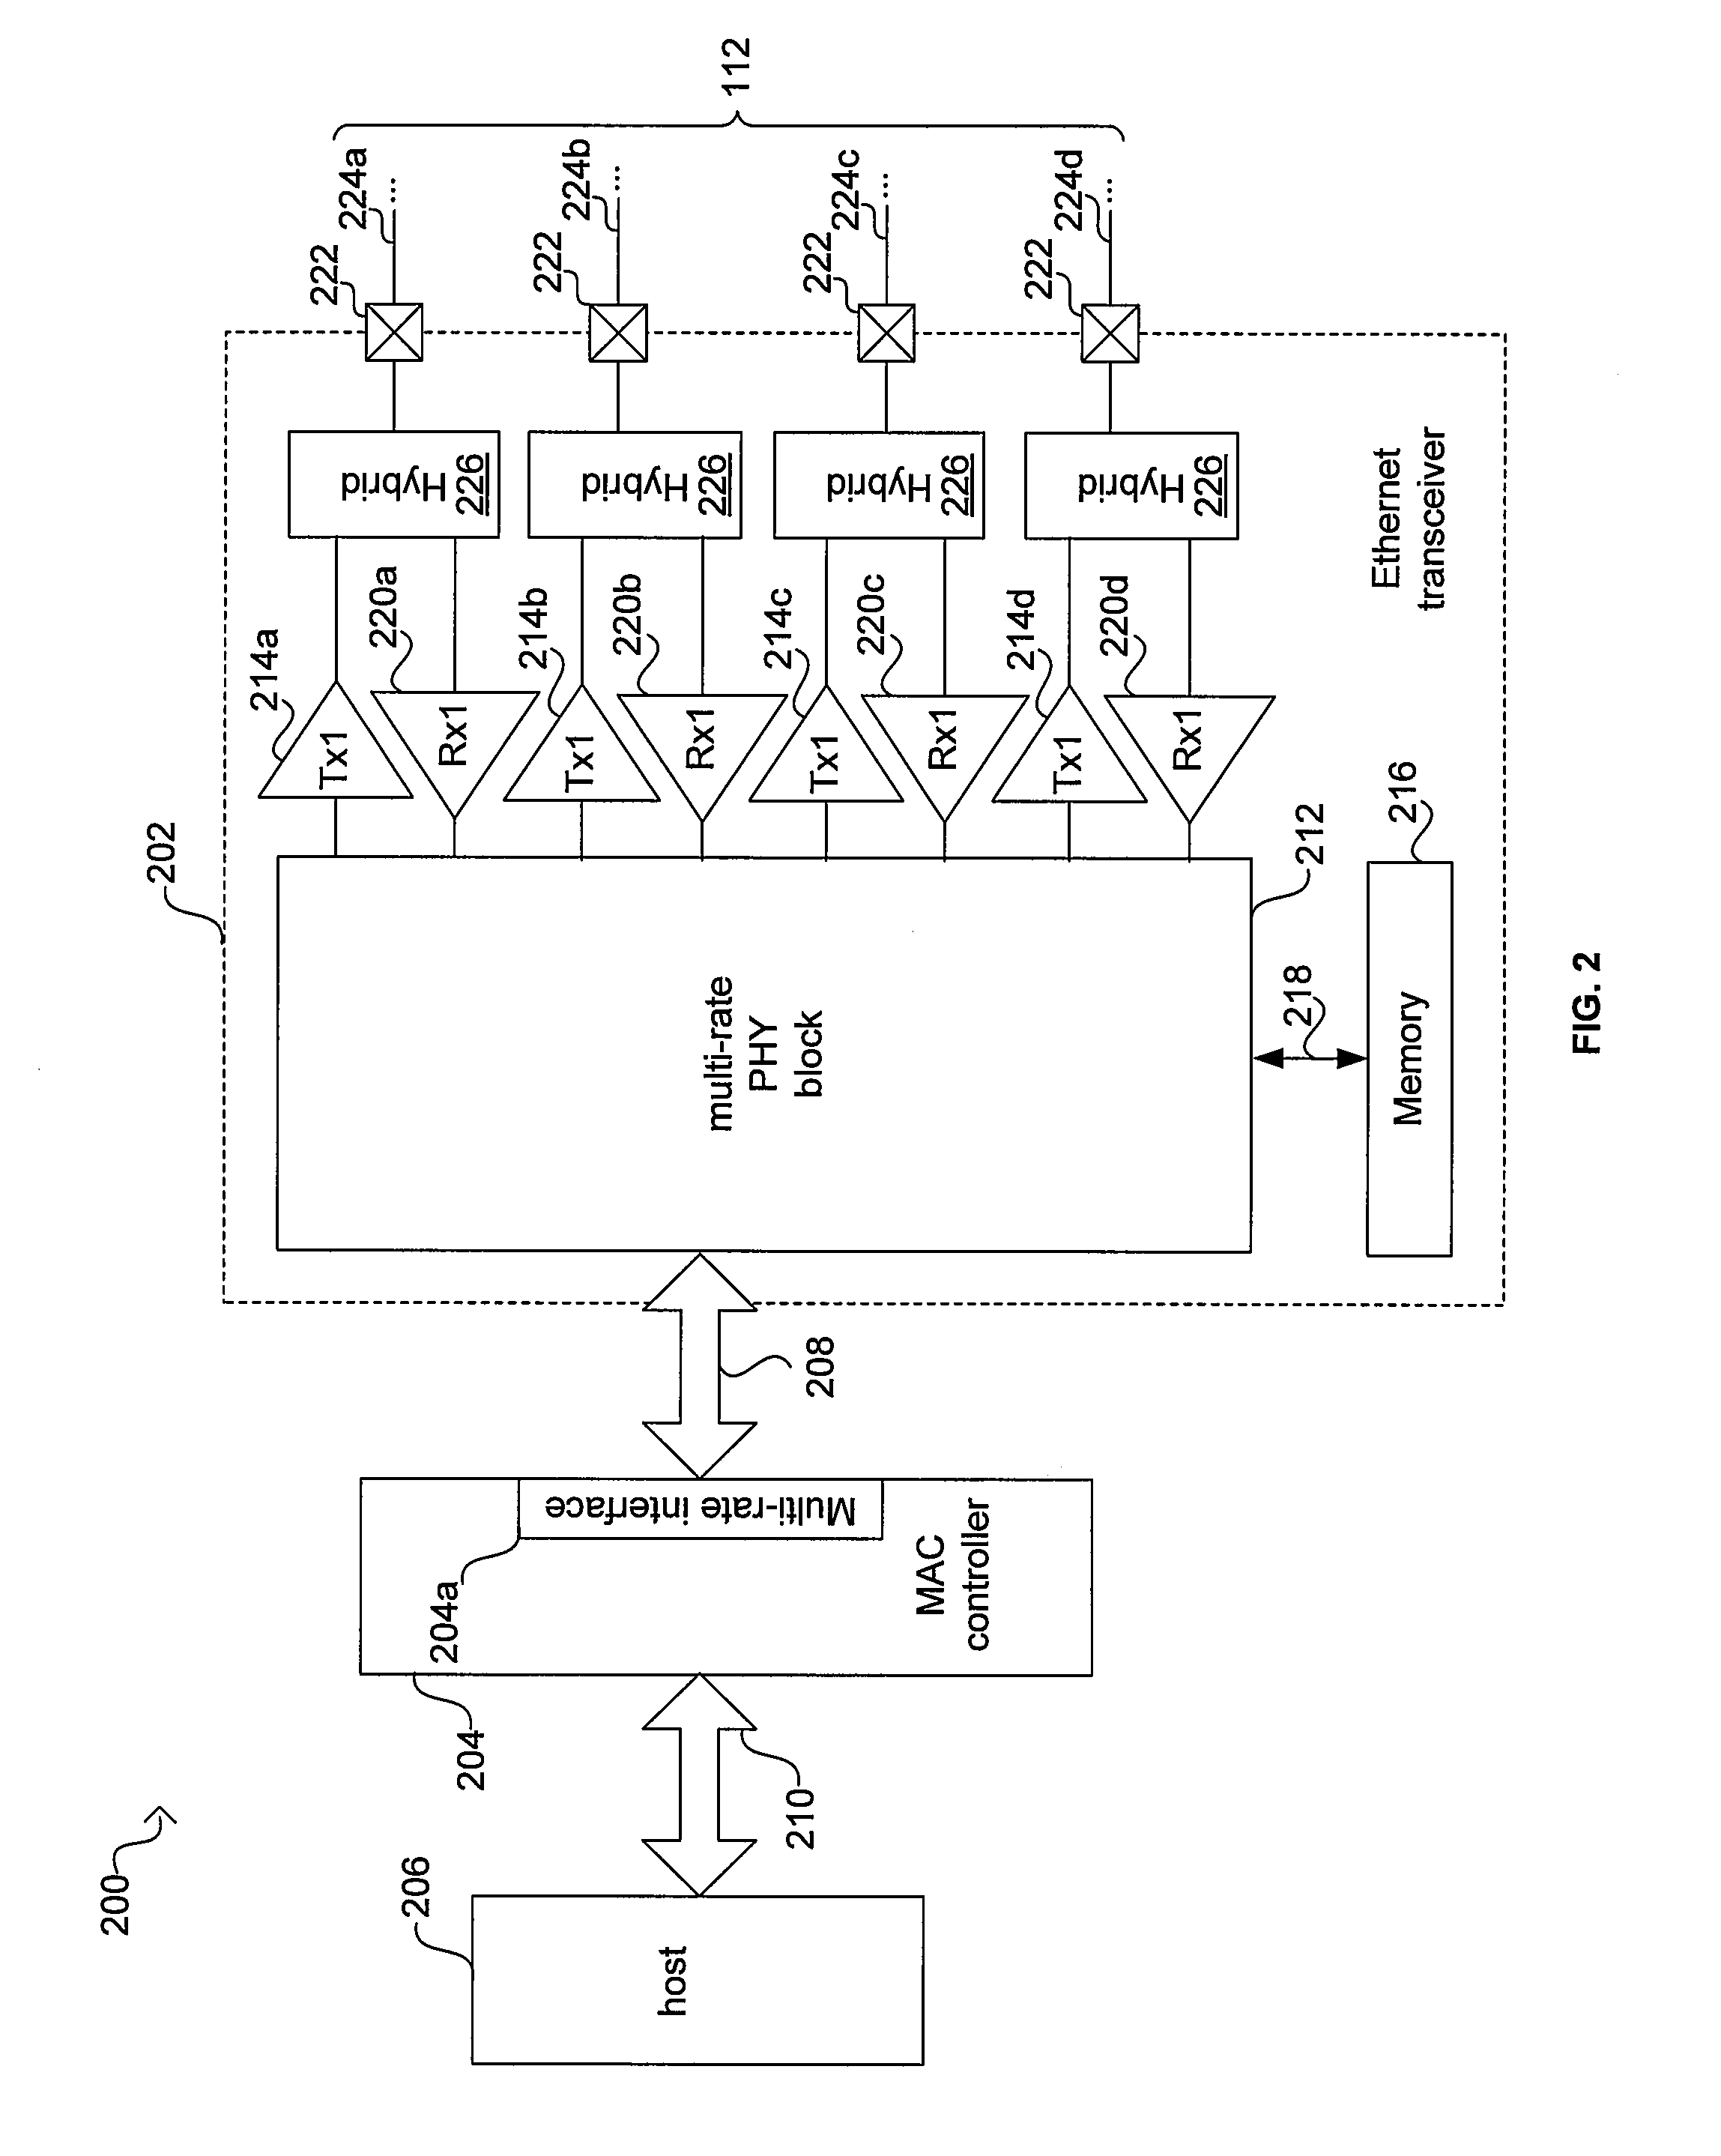 Method and system for reducing transceiver power via a variable symbol rate